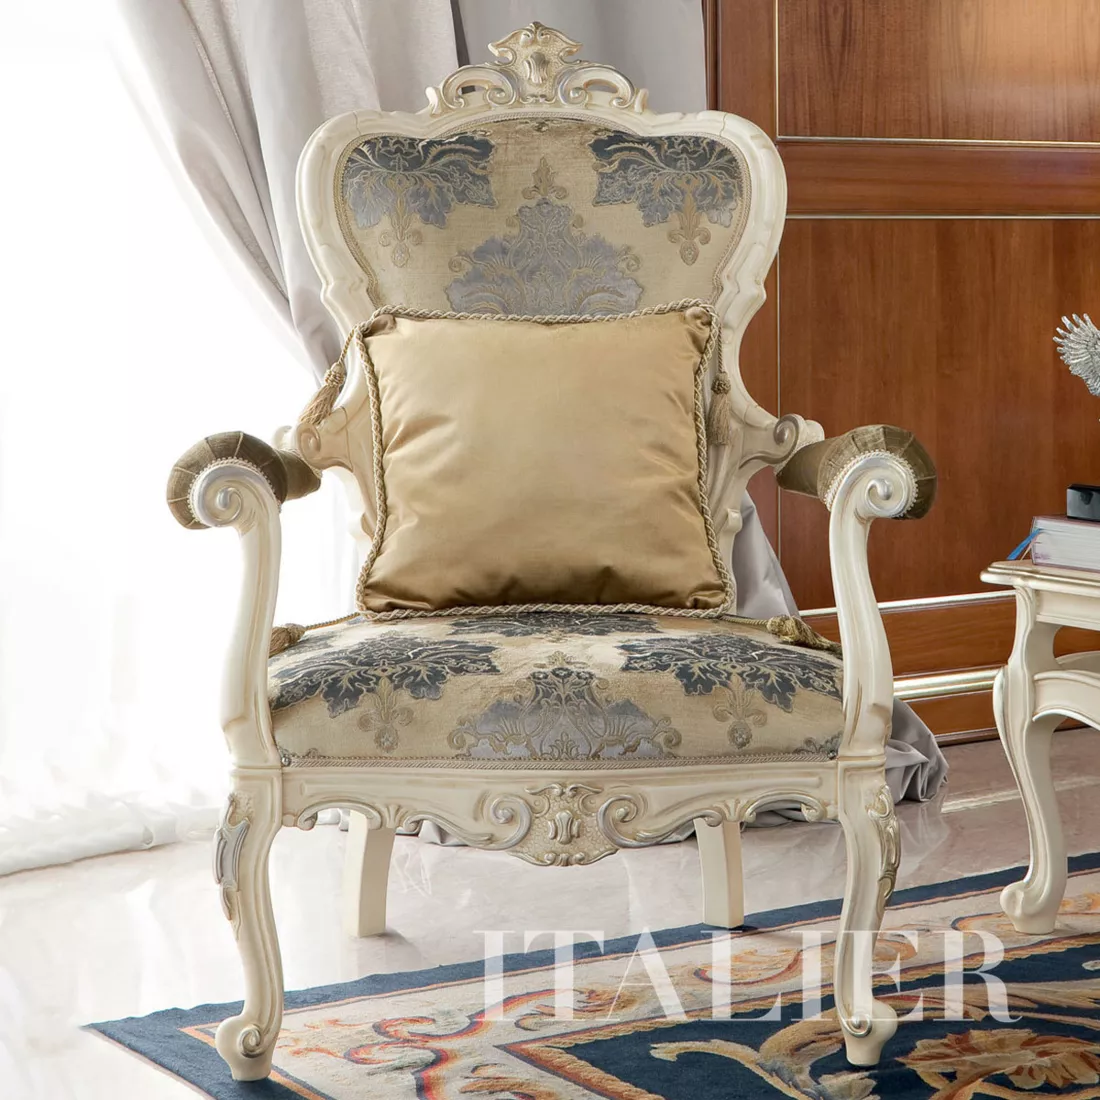 Luxury-padded-and-embroidered-chair-with-armrests-Bella-Vita-collection-Modenese-Gastonegtrfed